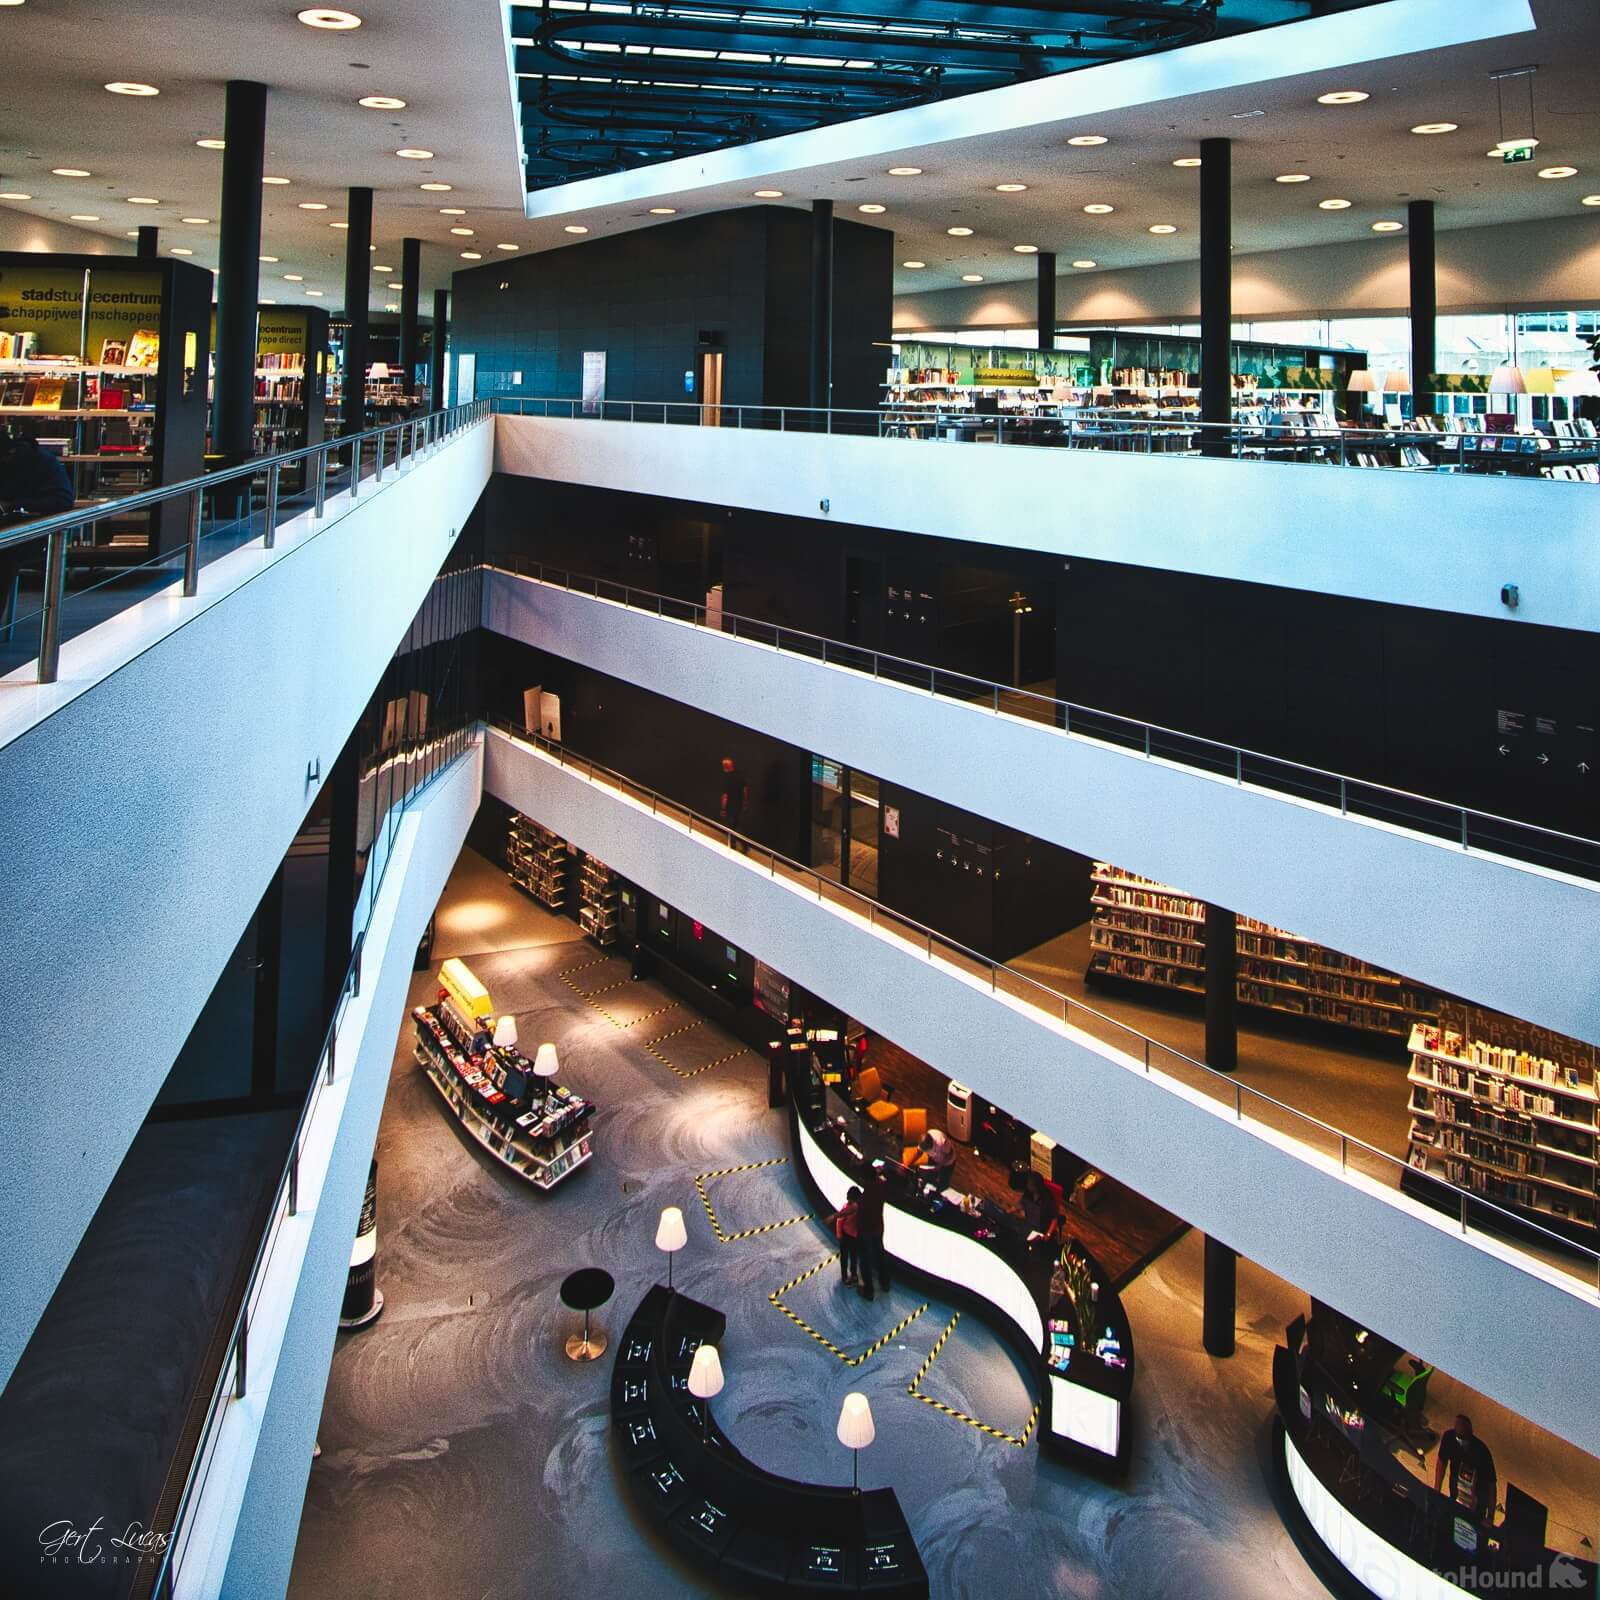 Image of Almere - The New Library by Gert Lucas